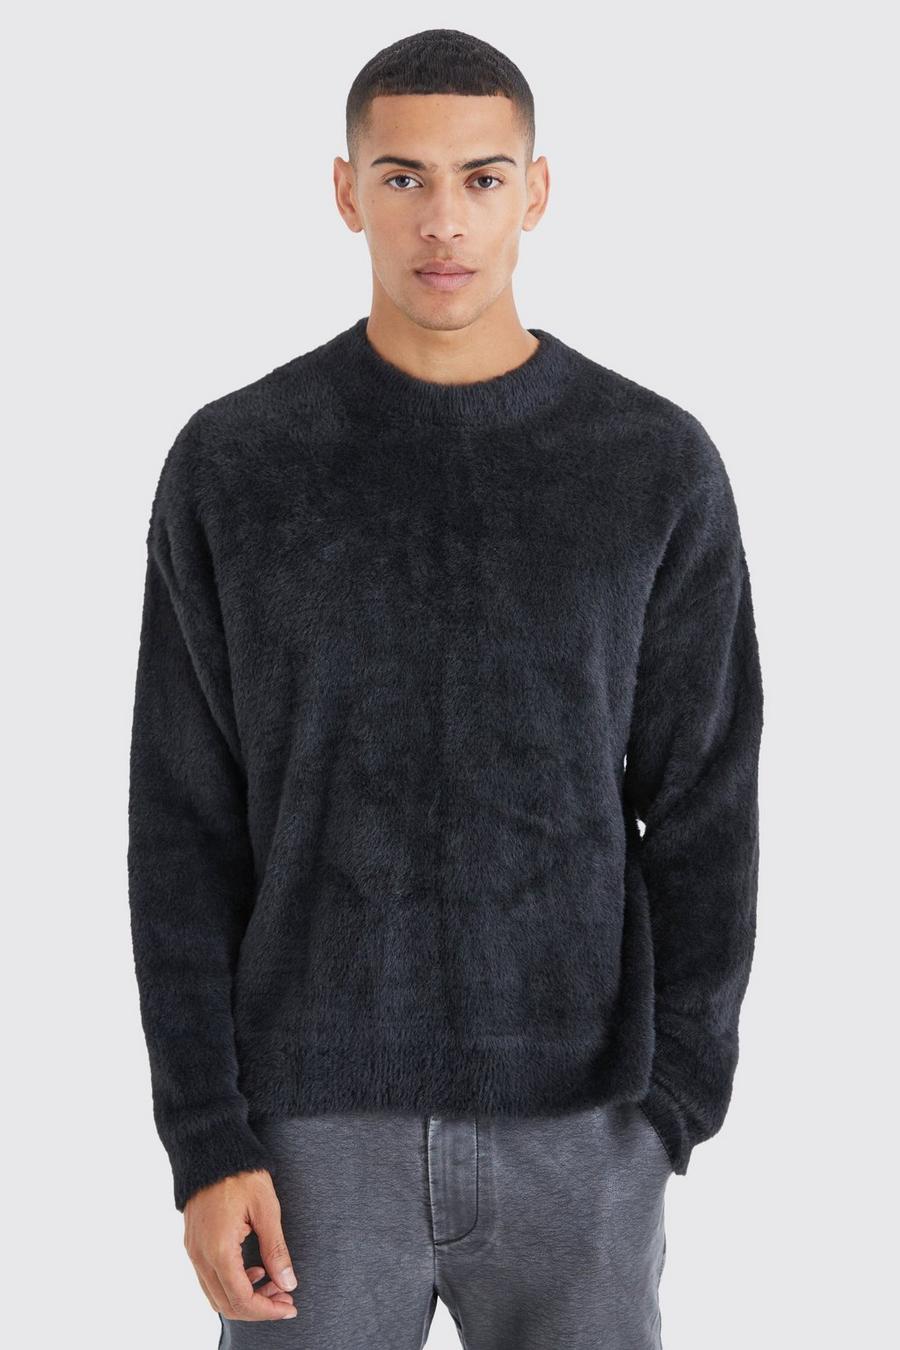 Black Boxy Crew Neck Fluffy Knitted Sweater